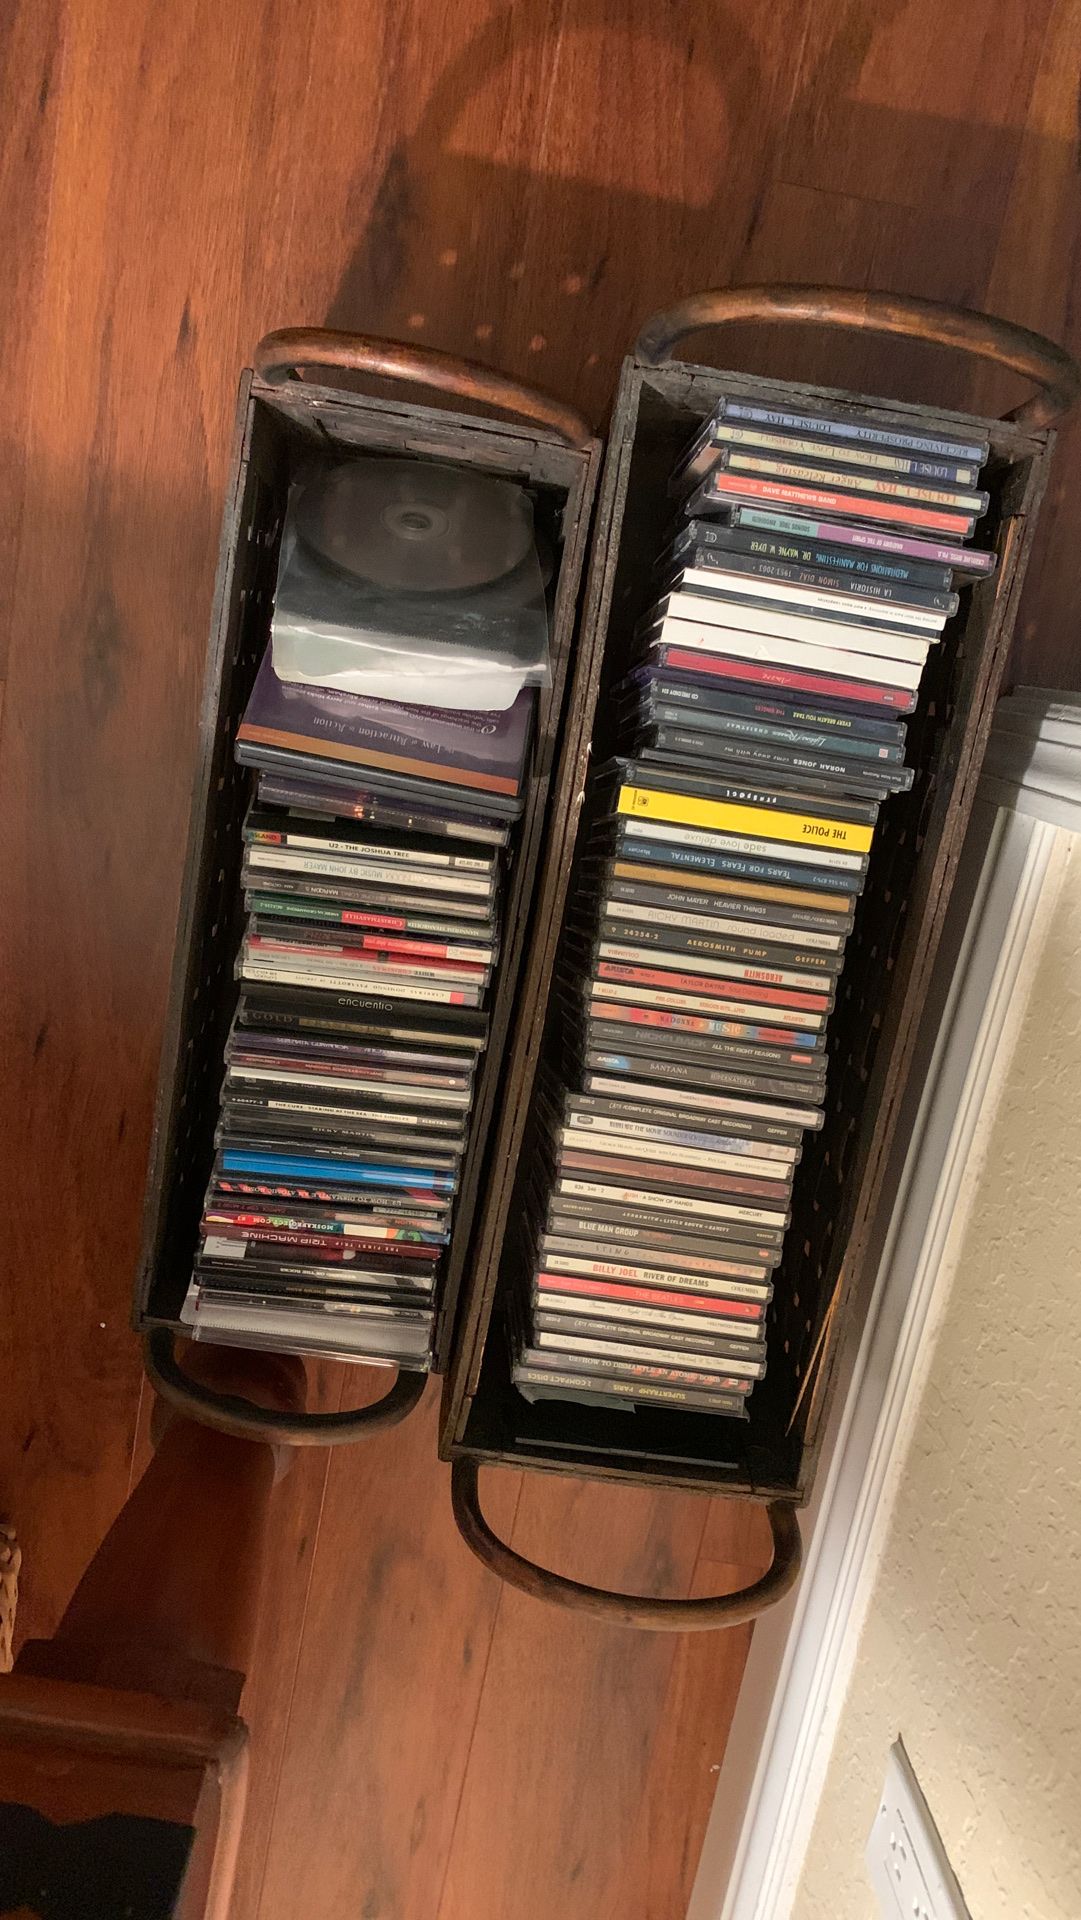 Take all my CD’s